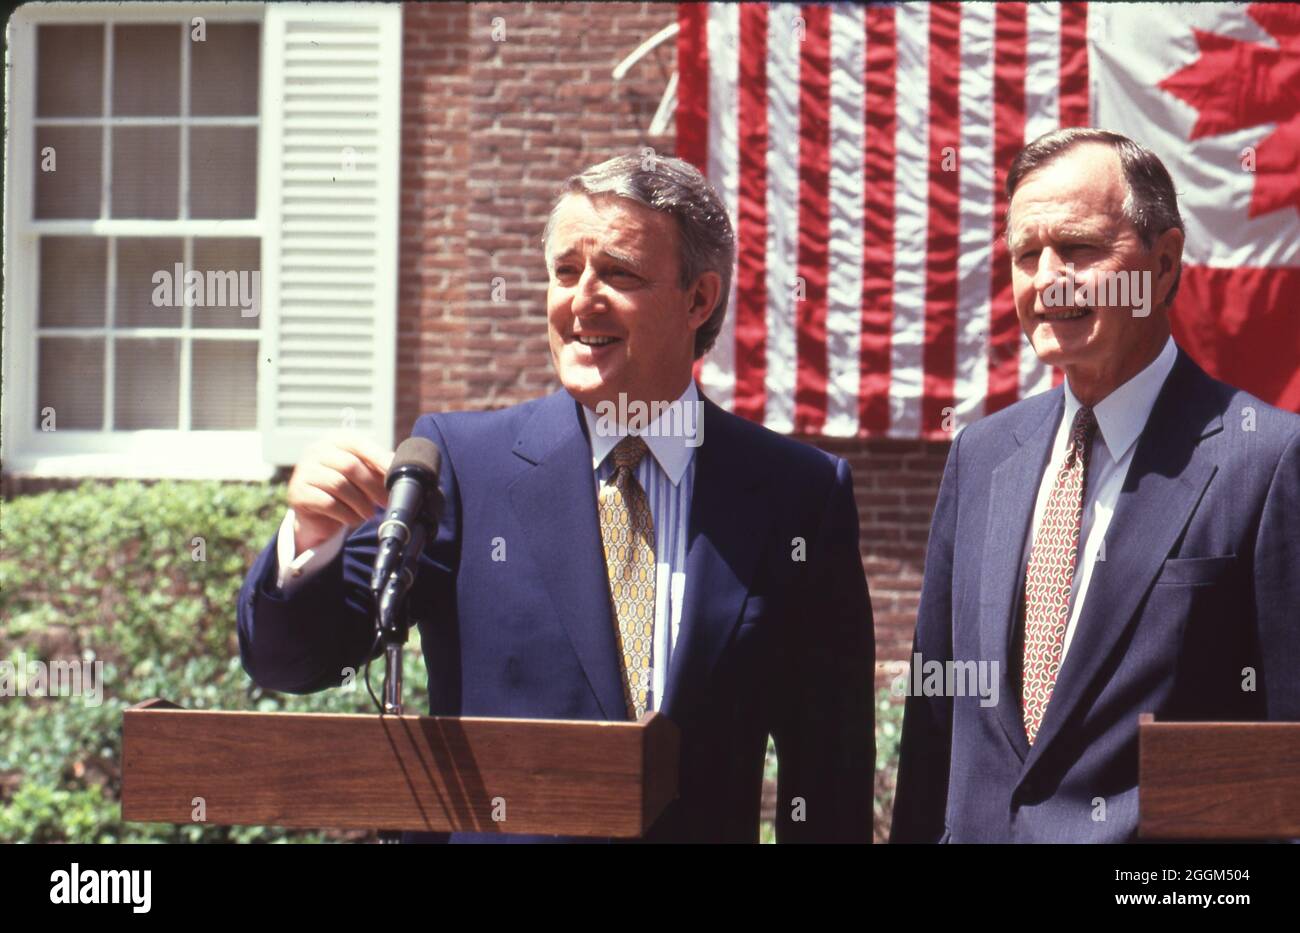 Houston Texas USA, July1990: Canadian Prime Minister Brian Mulroney, left, and United States President George H.W. Bush at the Houston Economic Summit of Industrialized Nations. ©Bob Daemmrich Stock Photo